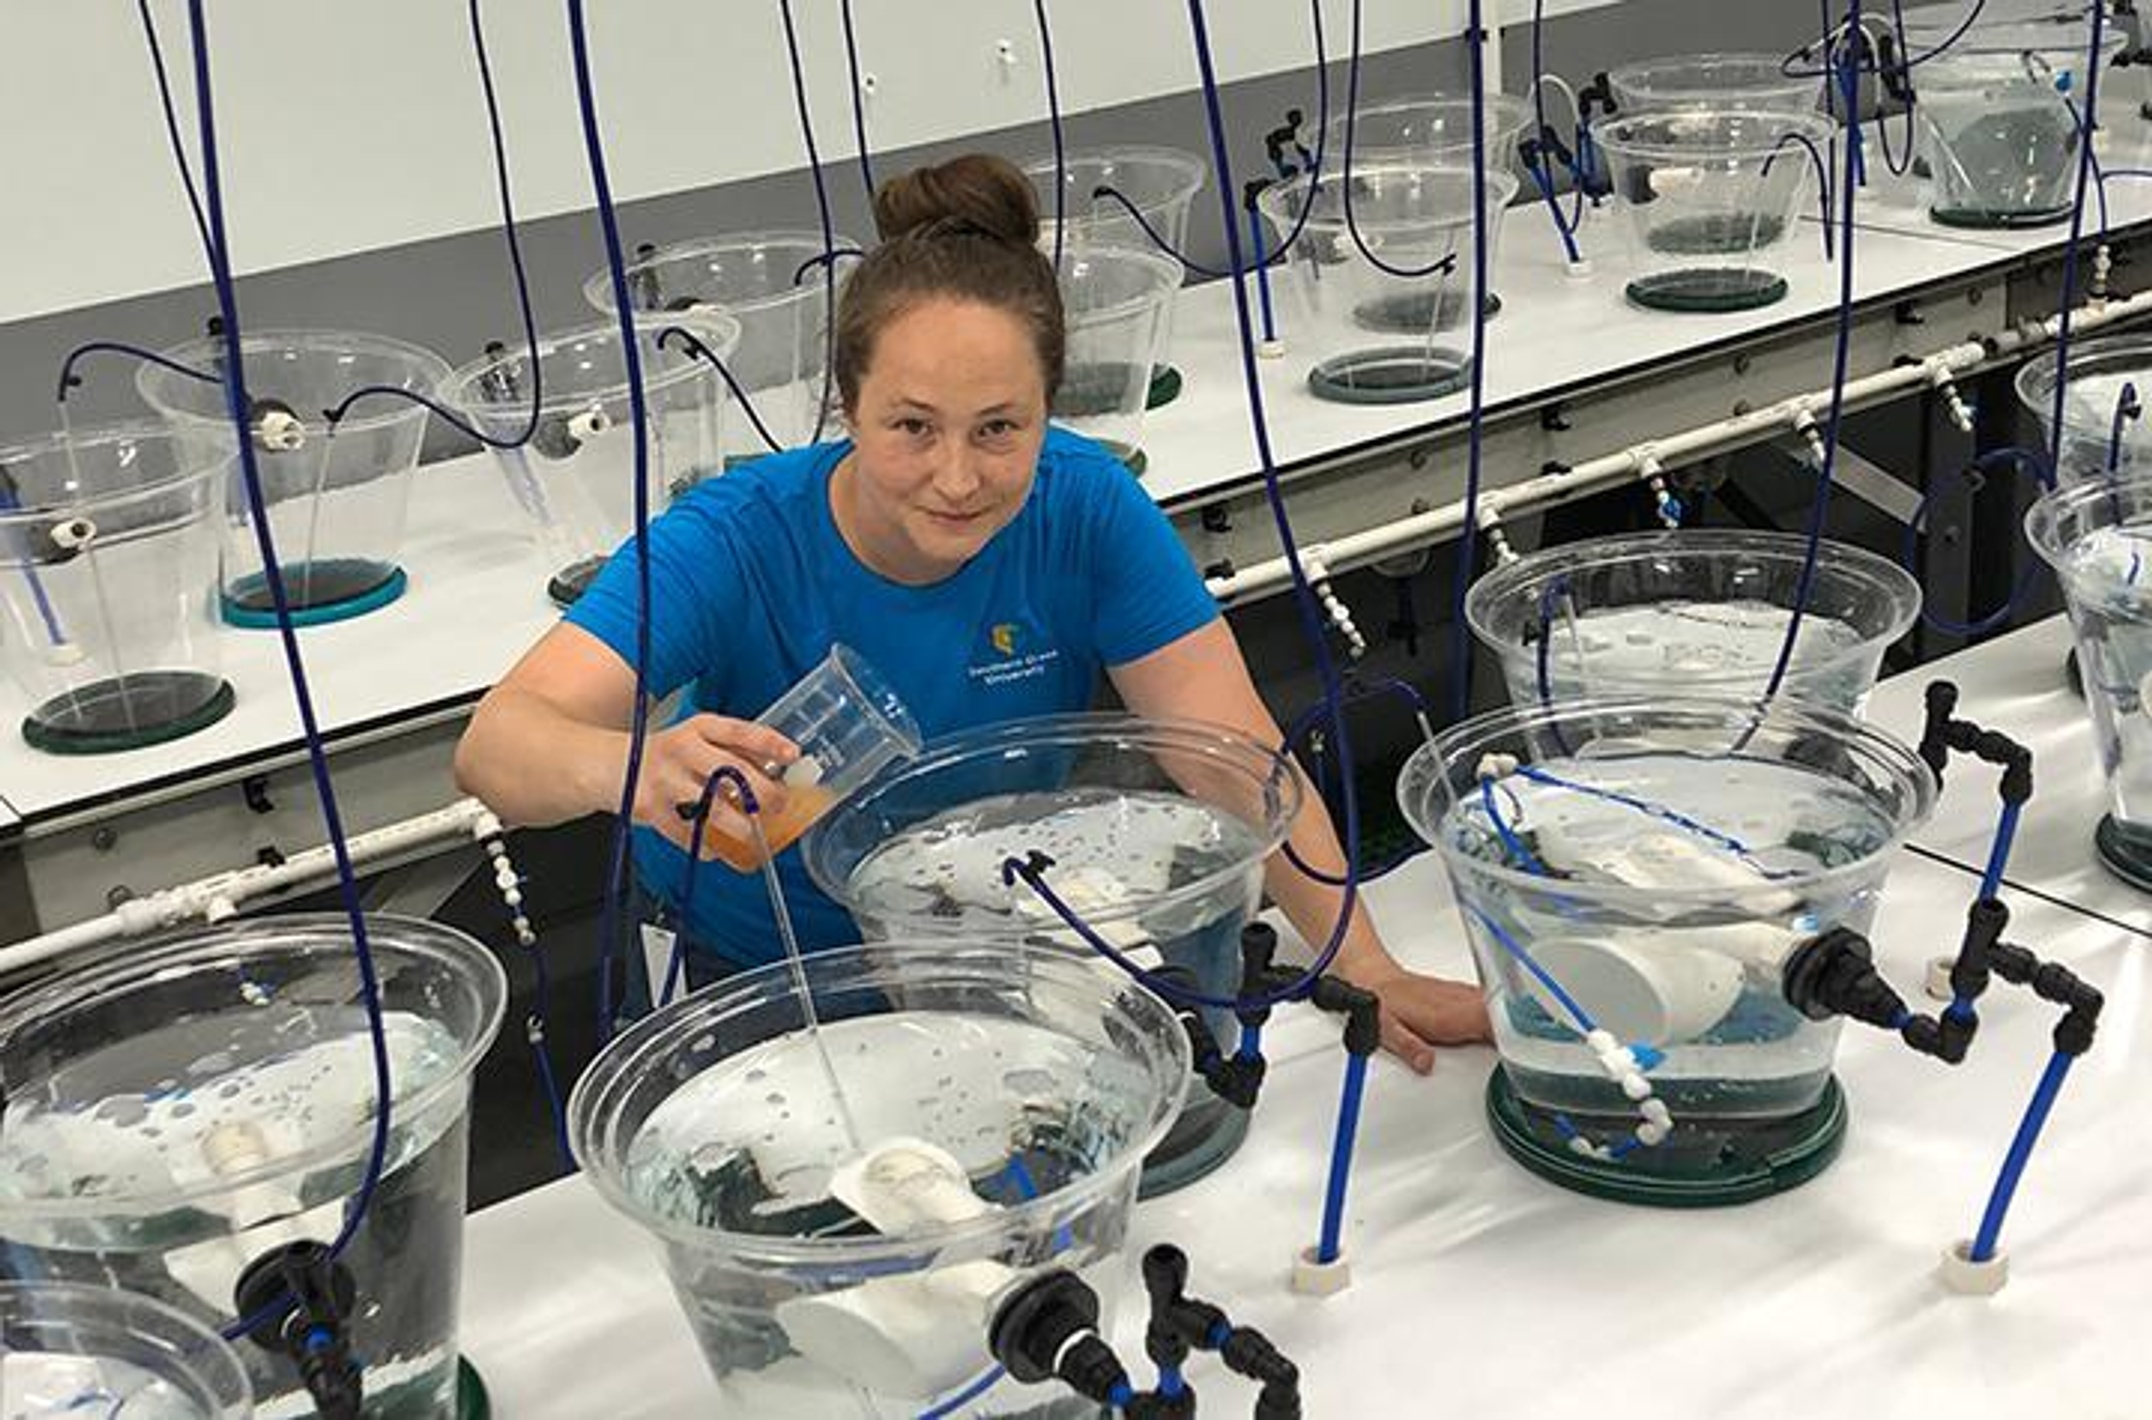 Colleen Rodd with food reared coral larvae experiment